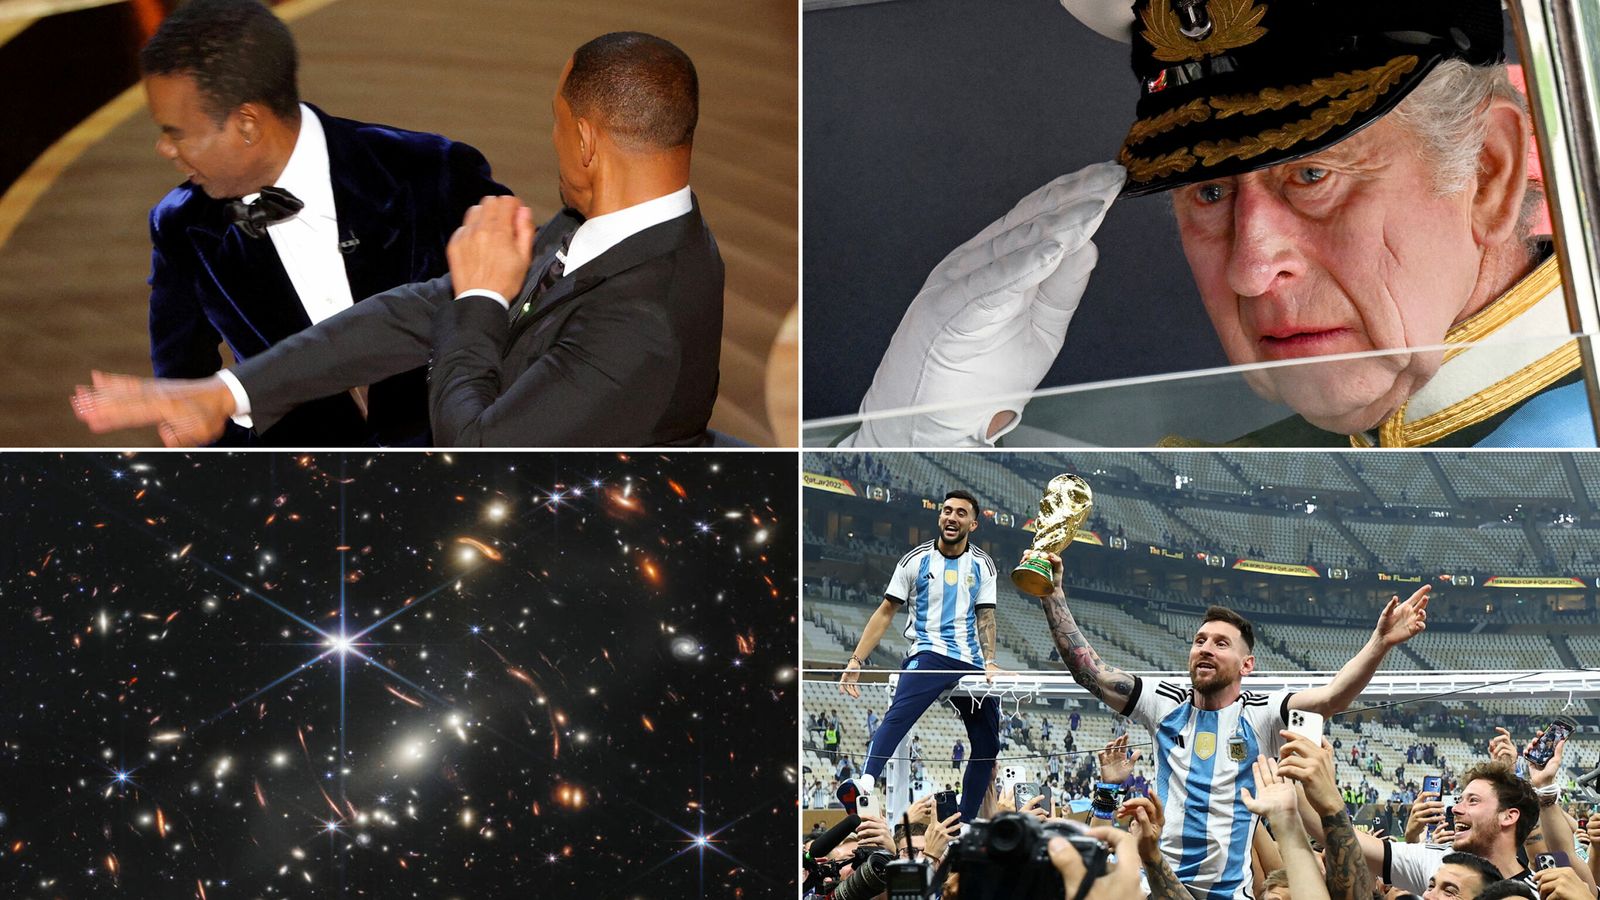 War, drought, protest and prime ministers: The most striking images from a tumultuous year